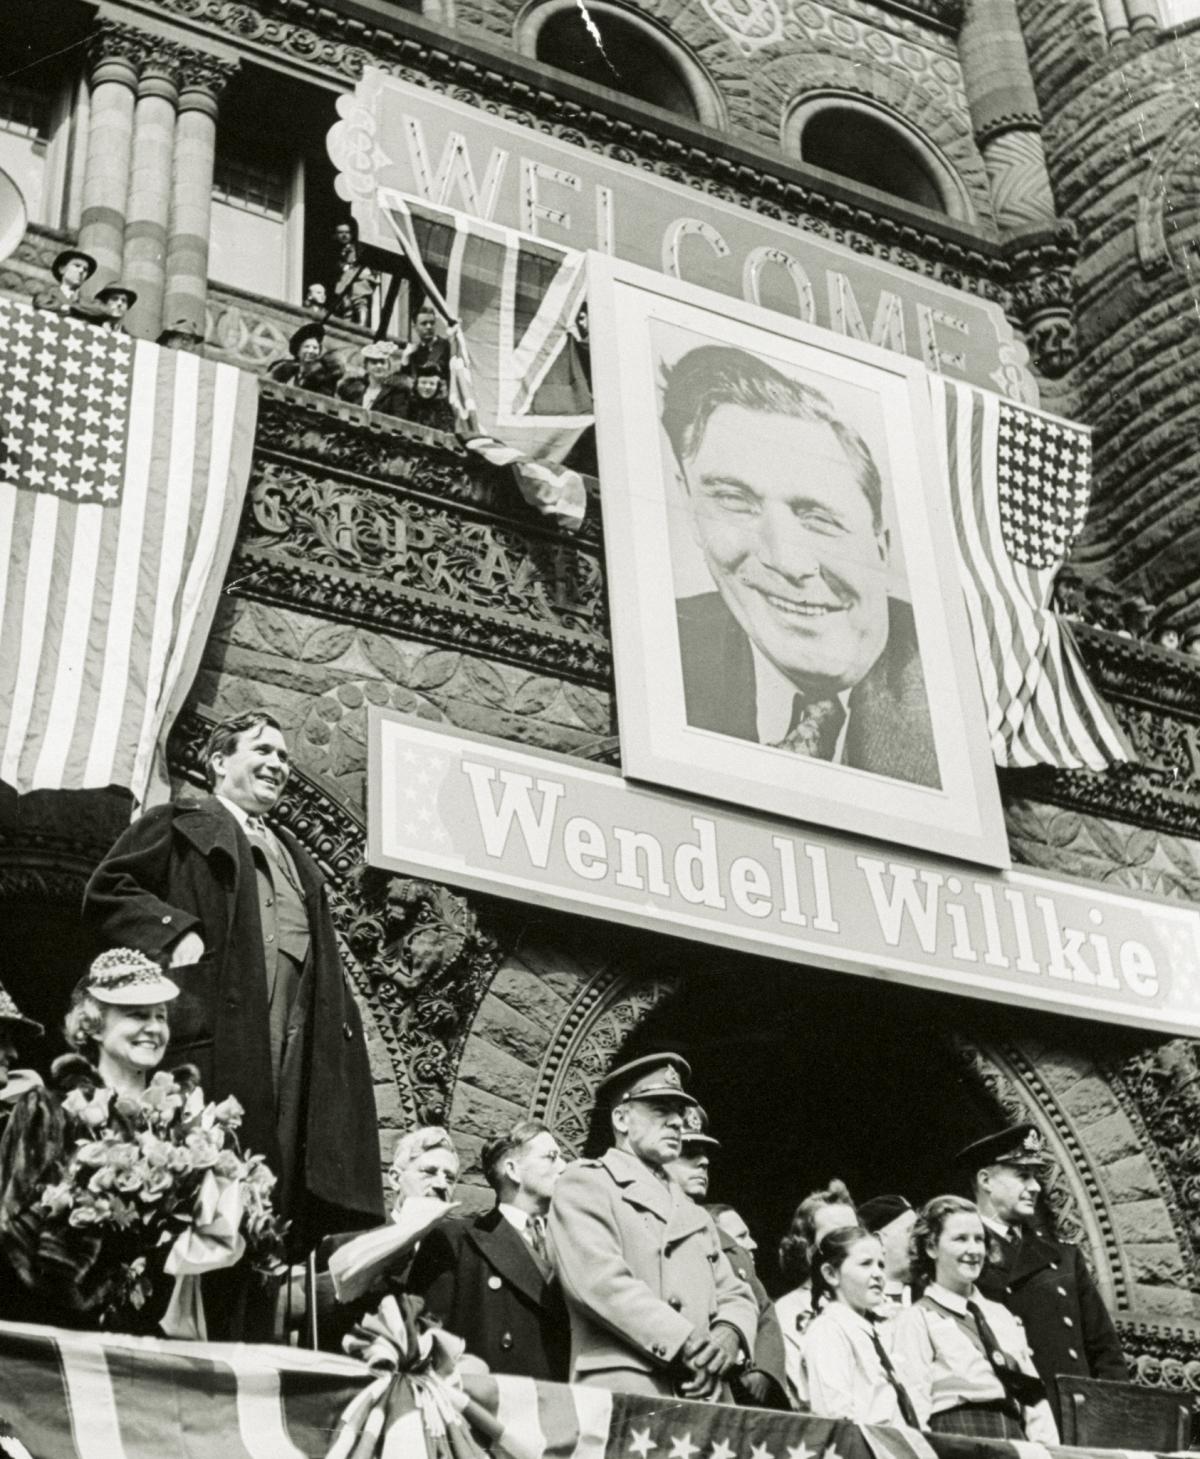 black and white photograph of a campaign photo and sign, people on a stage